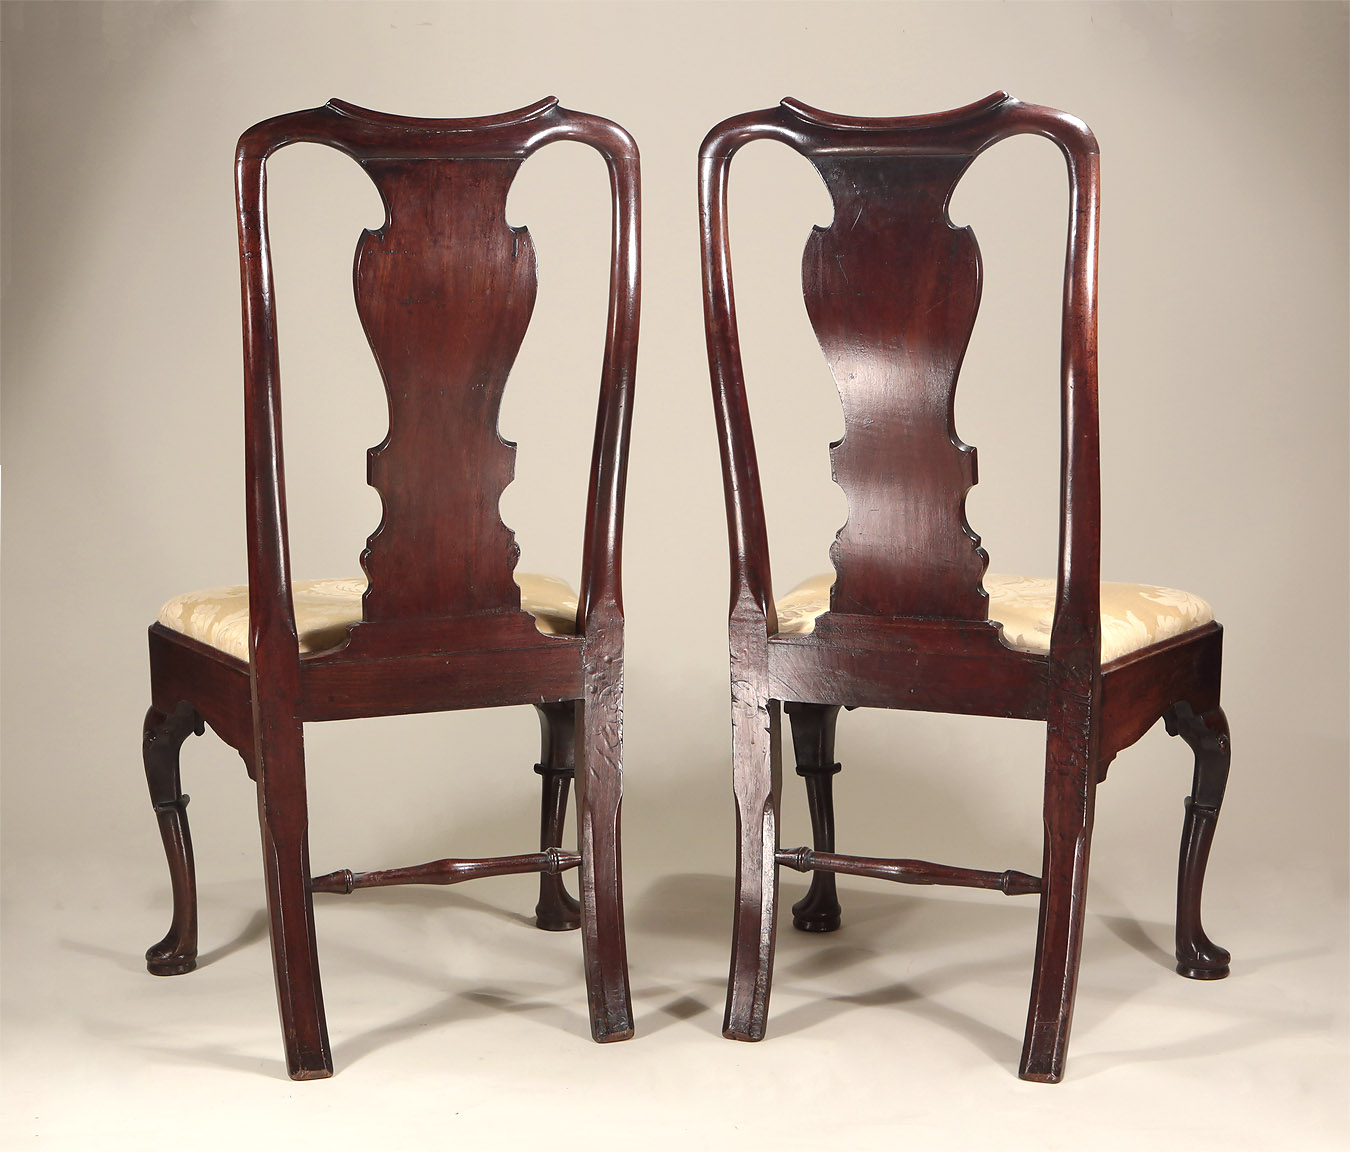 Pair George I / II Cuban Mahogany Side Chairs, c1725-30, showing the back side